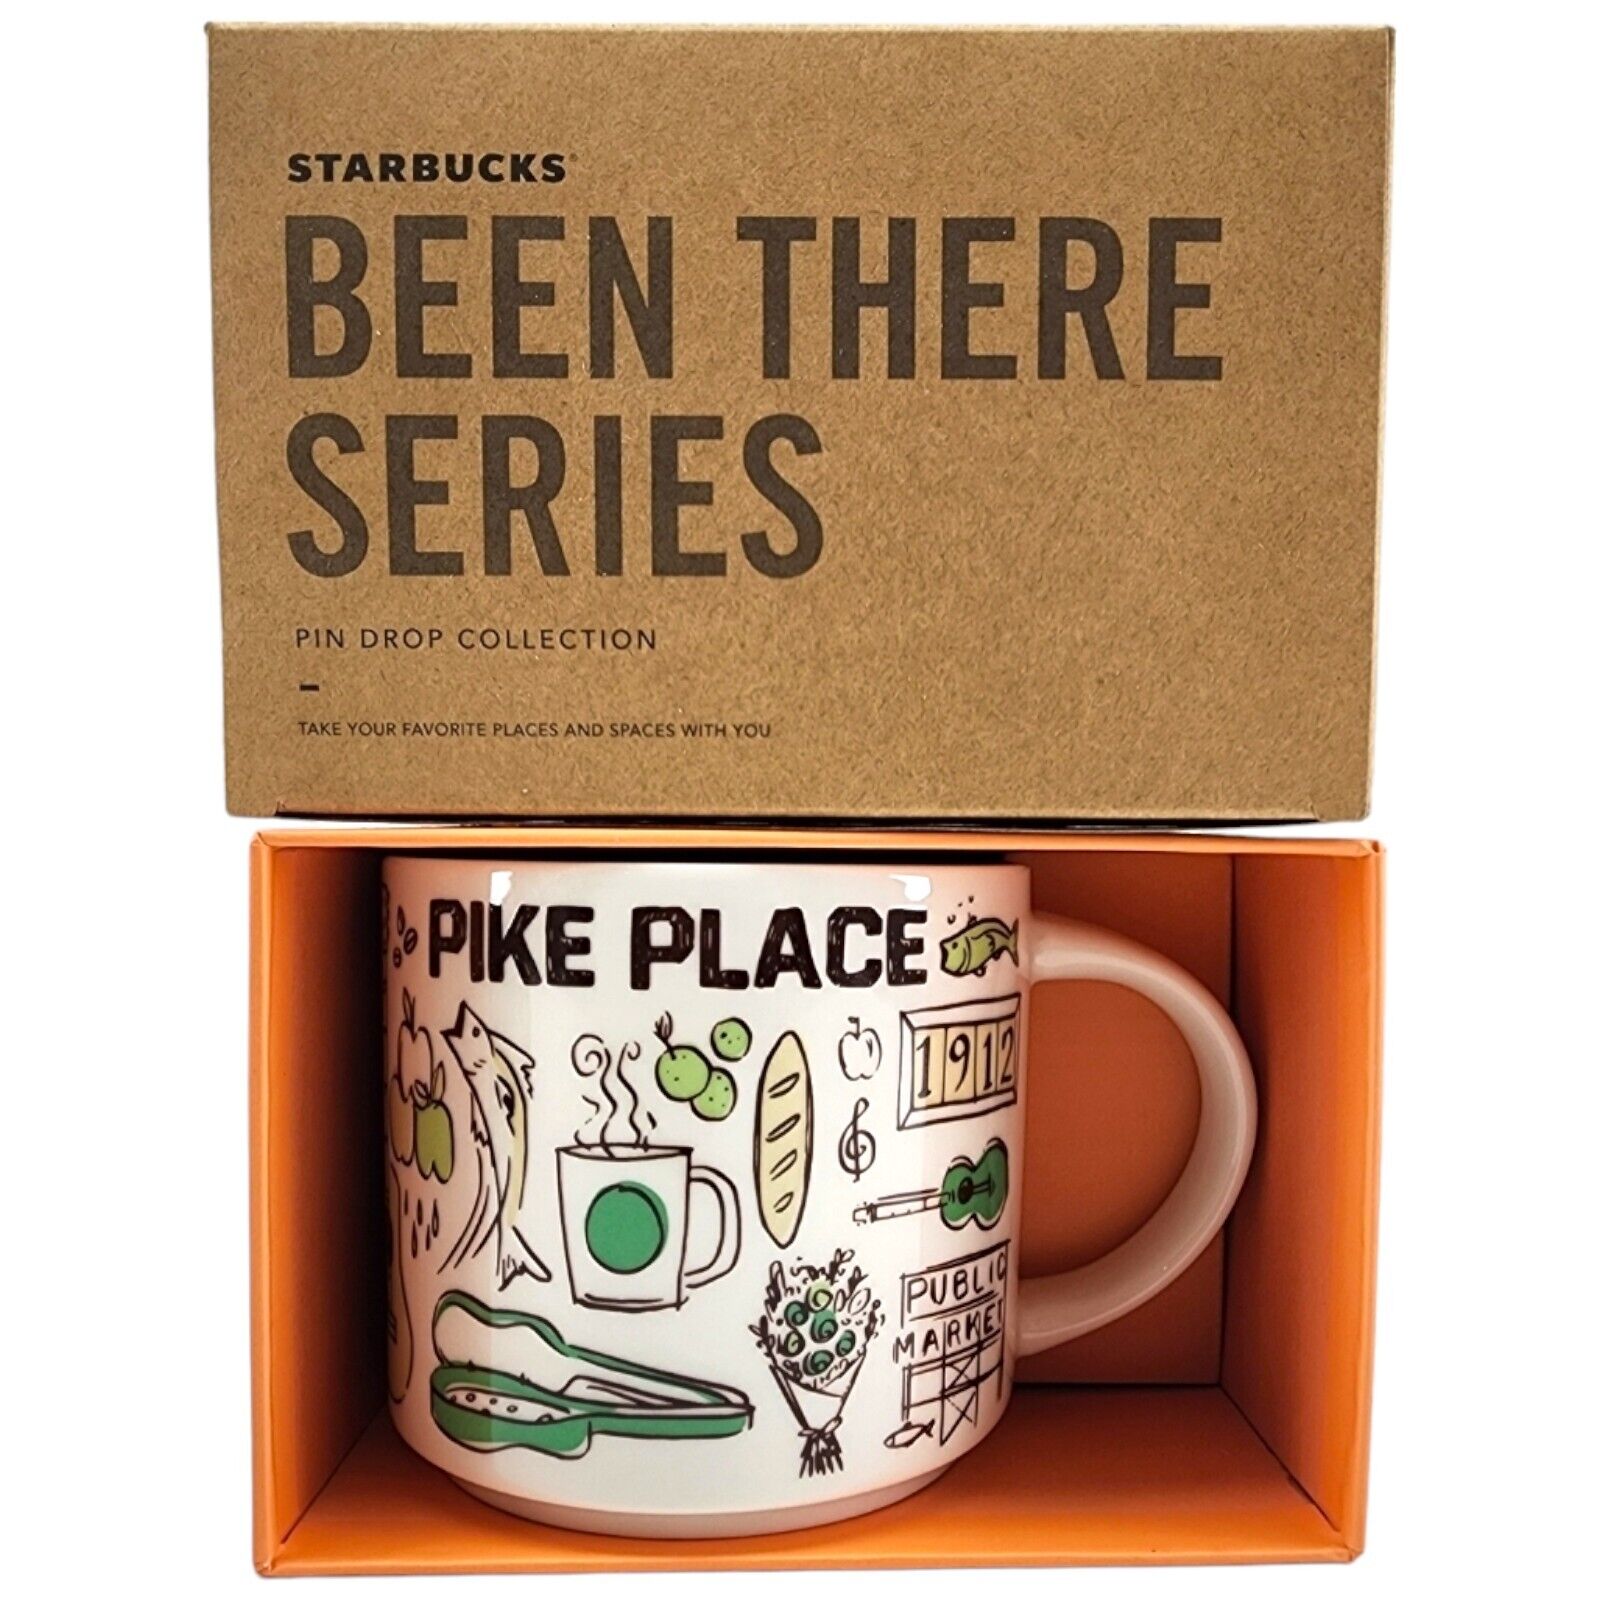 Starbucks Been There Series Pike Place Ceramic Coffee Cup Mug 14 oz. NEW W/BOX